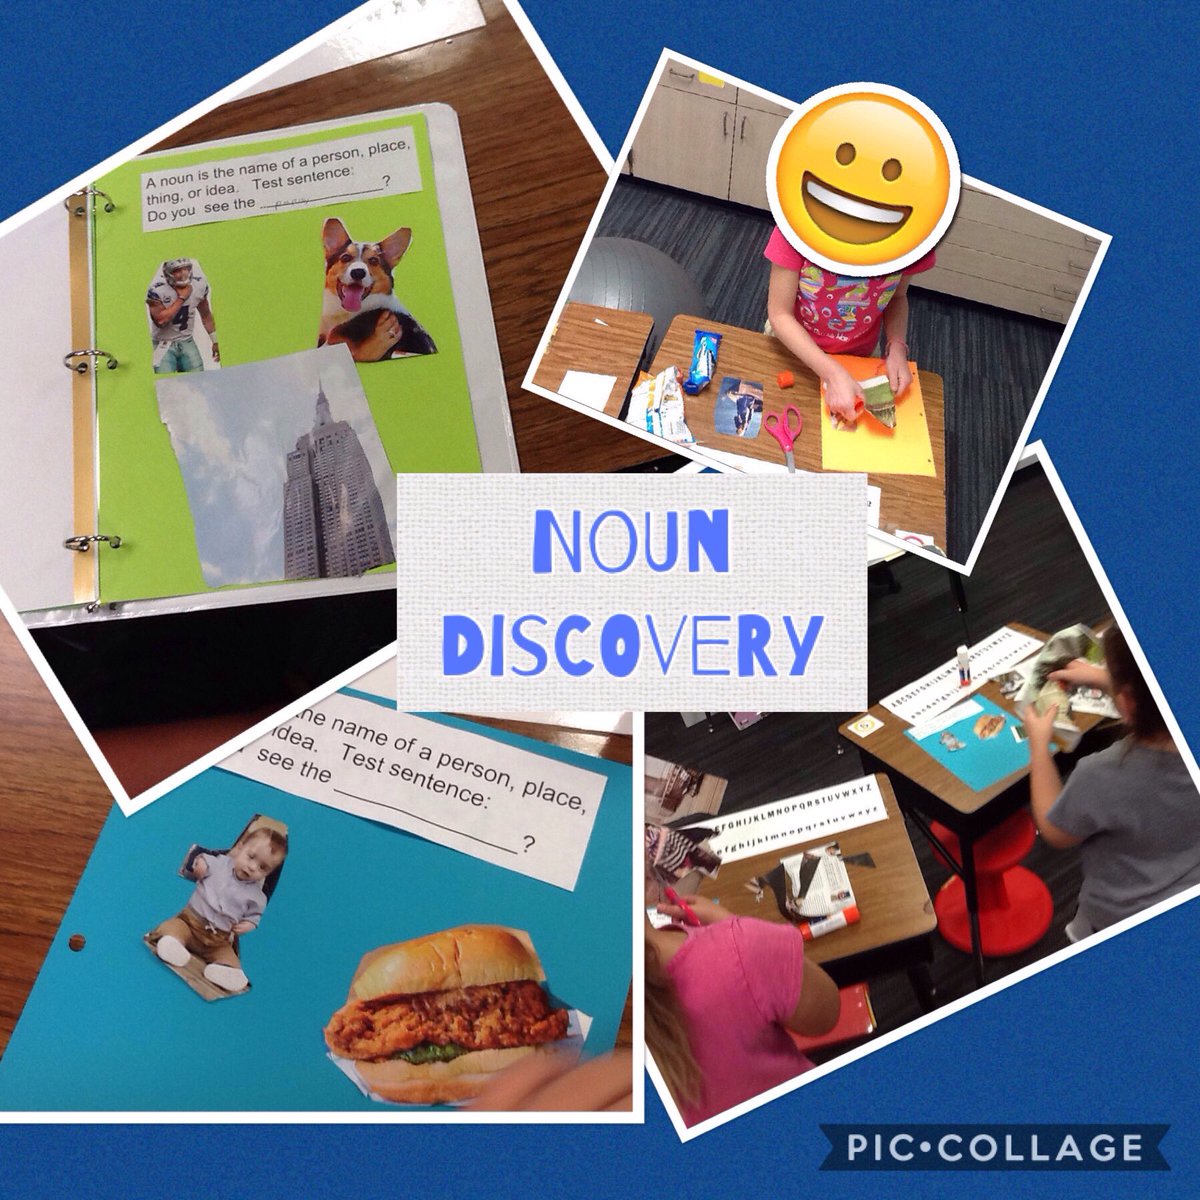 Students had fun with discovery learning Monday.  #dyslexiaRISD #BetterTogether